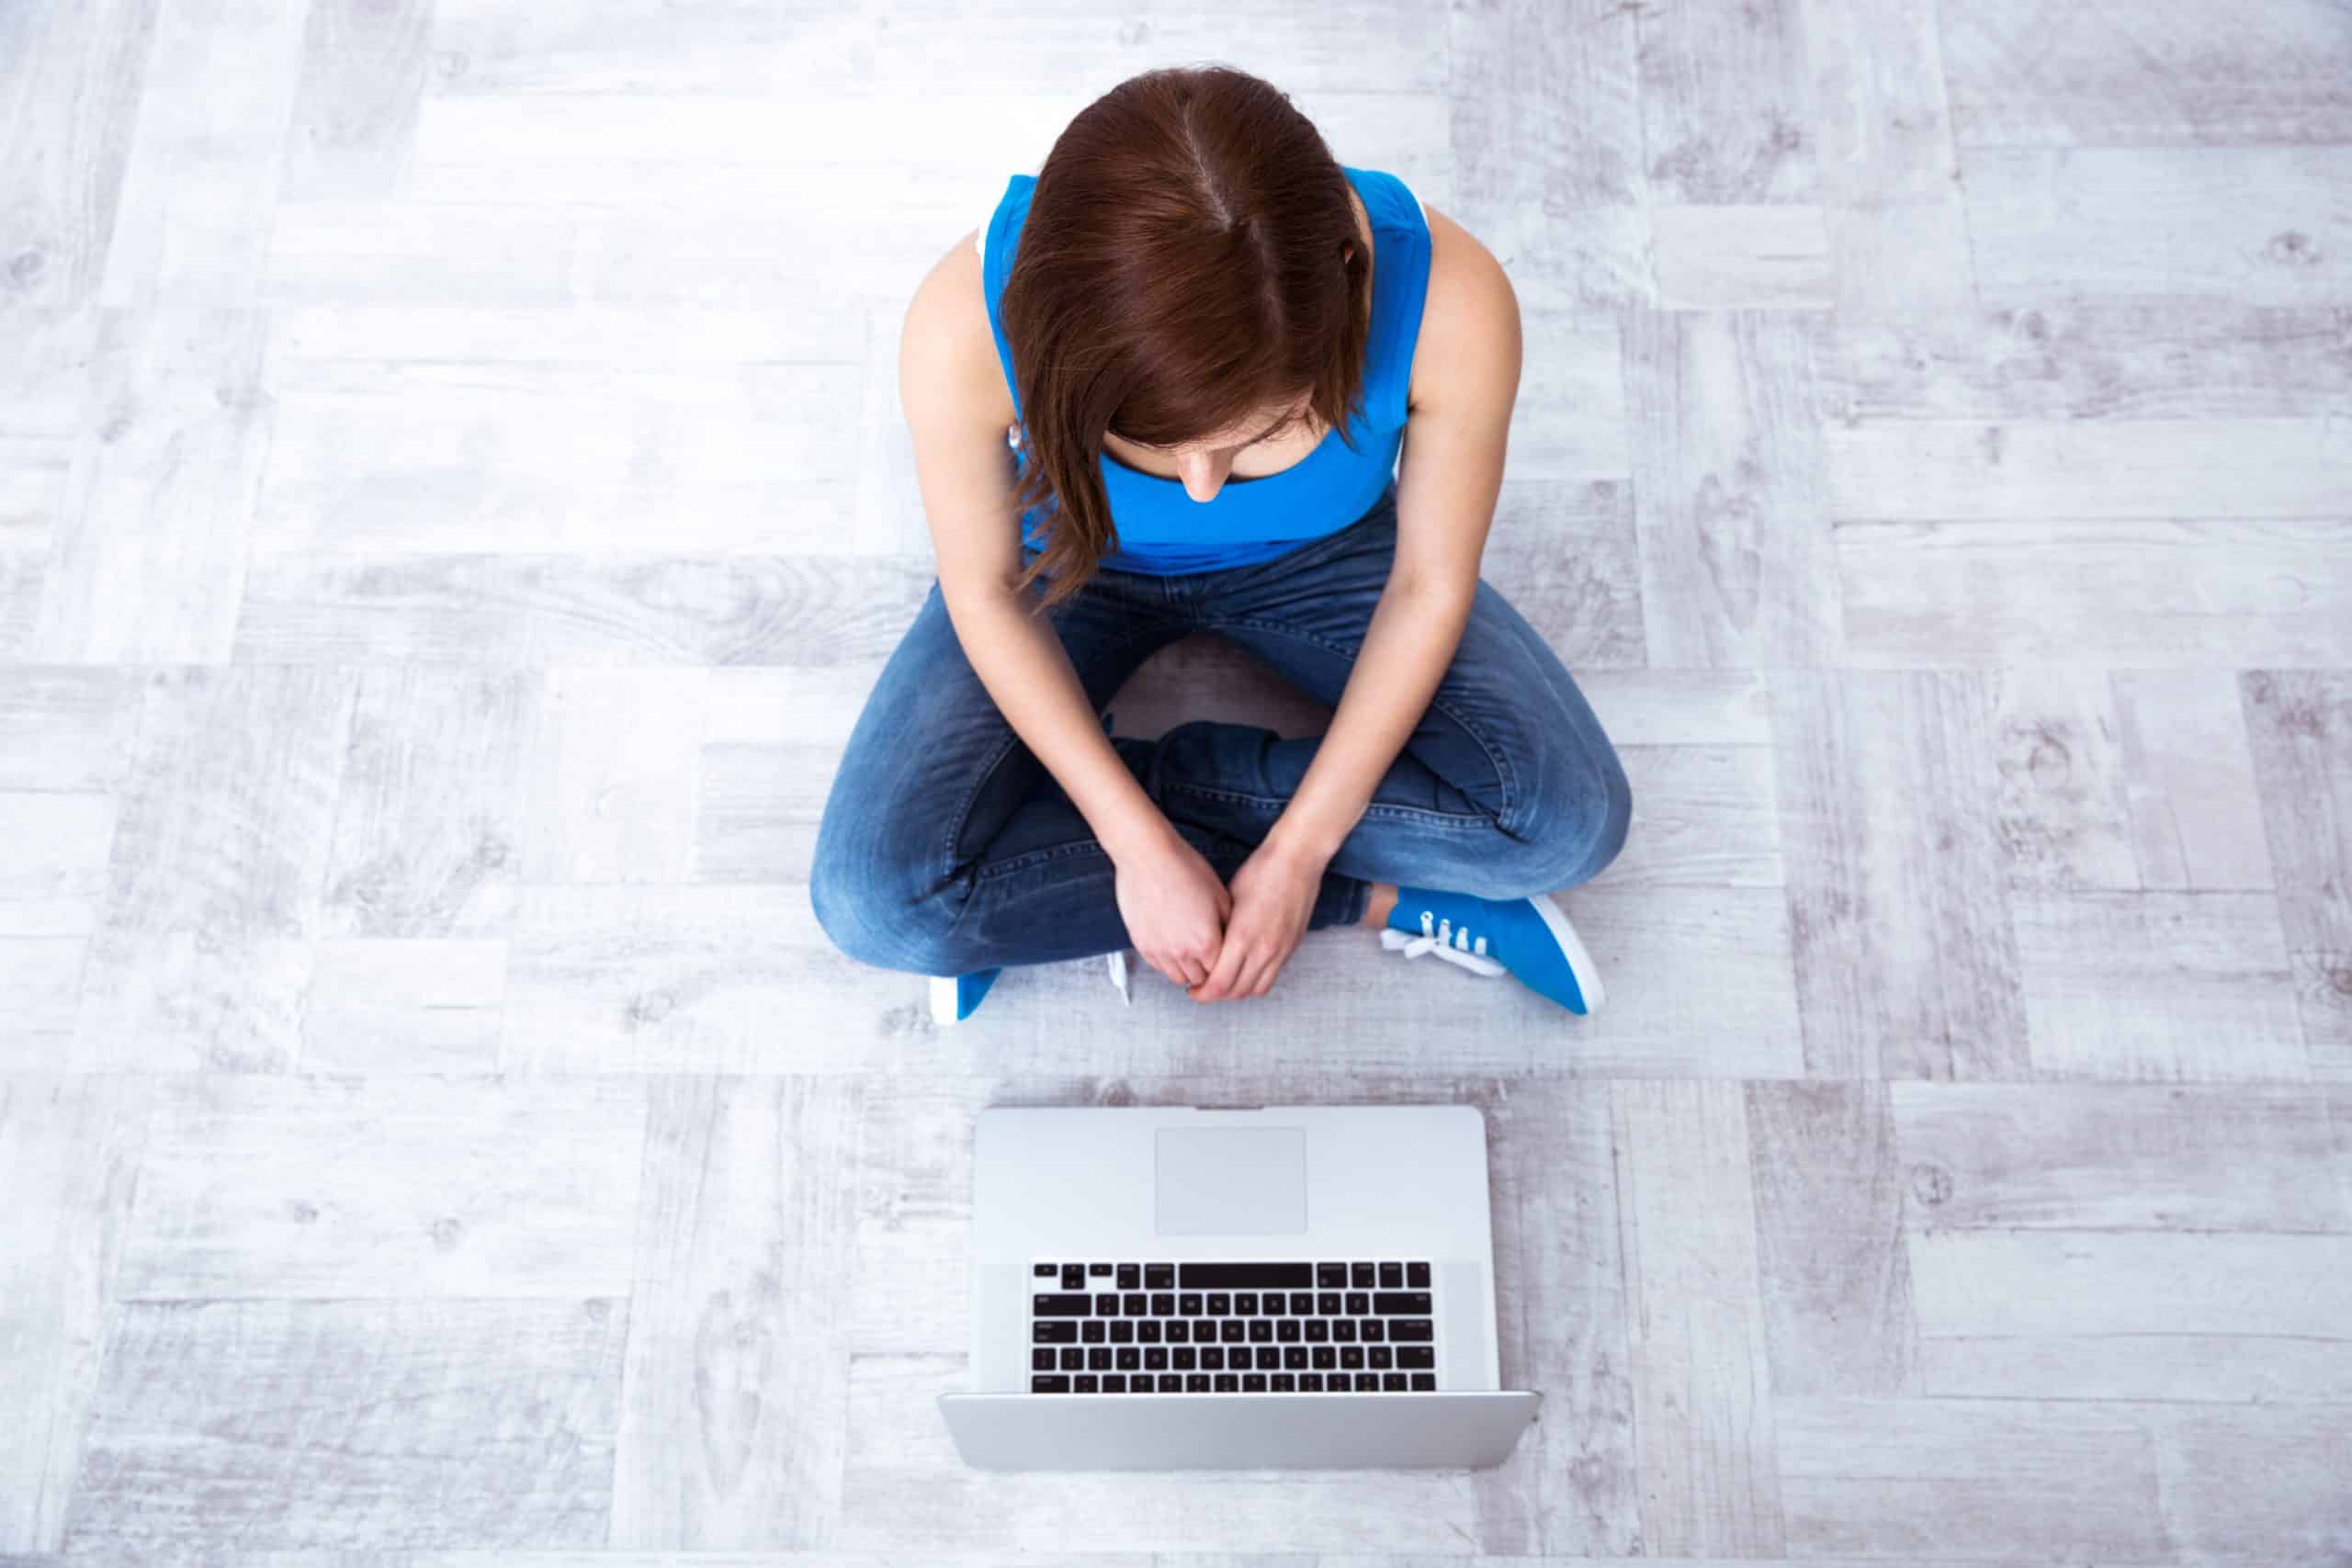 Top view portrait of a young woman sitting on floor with laptop